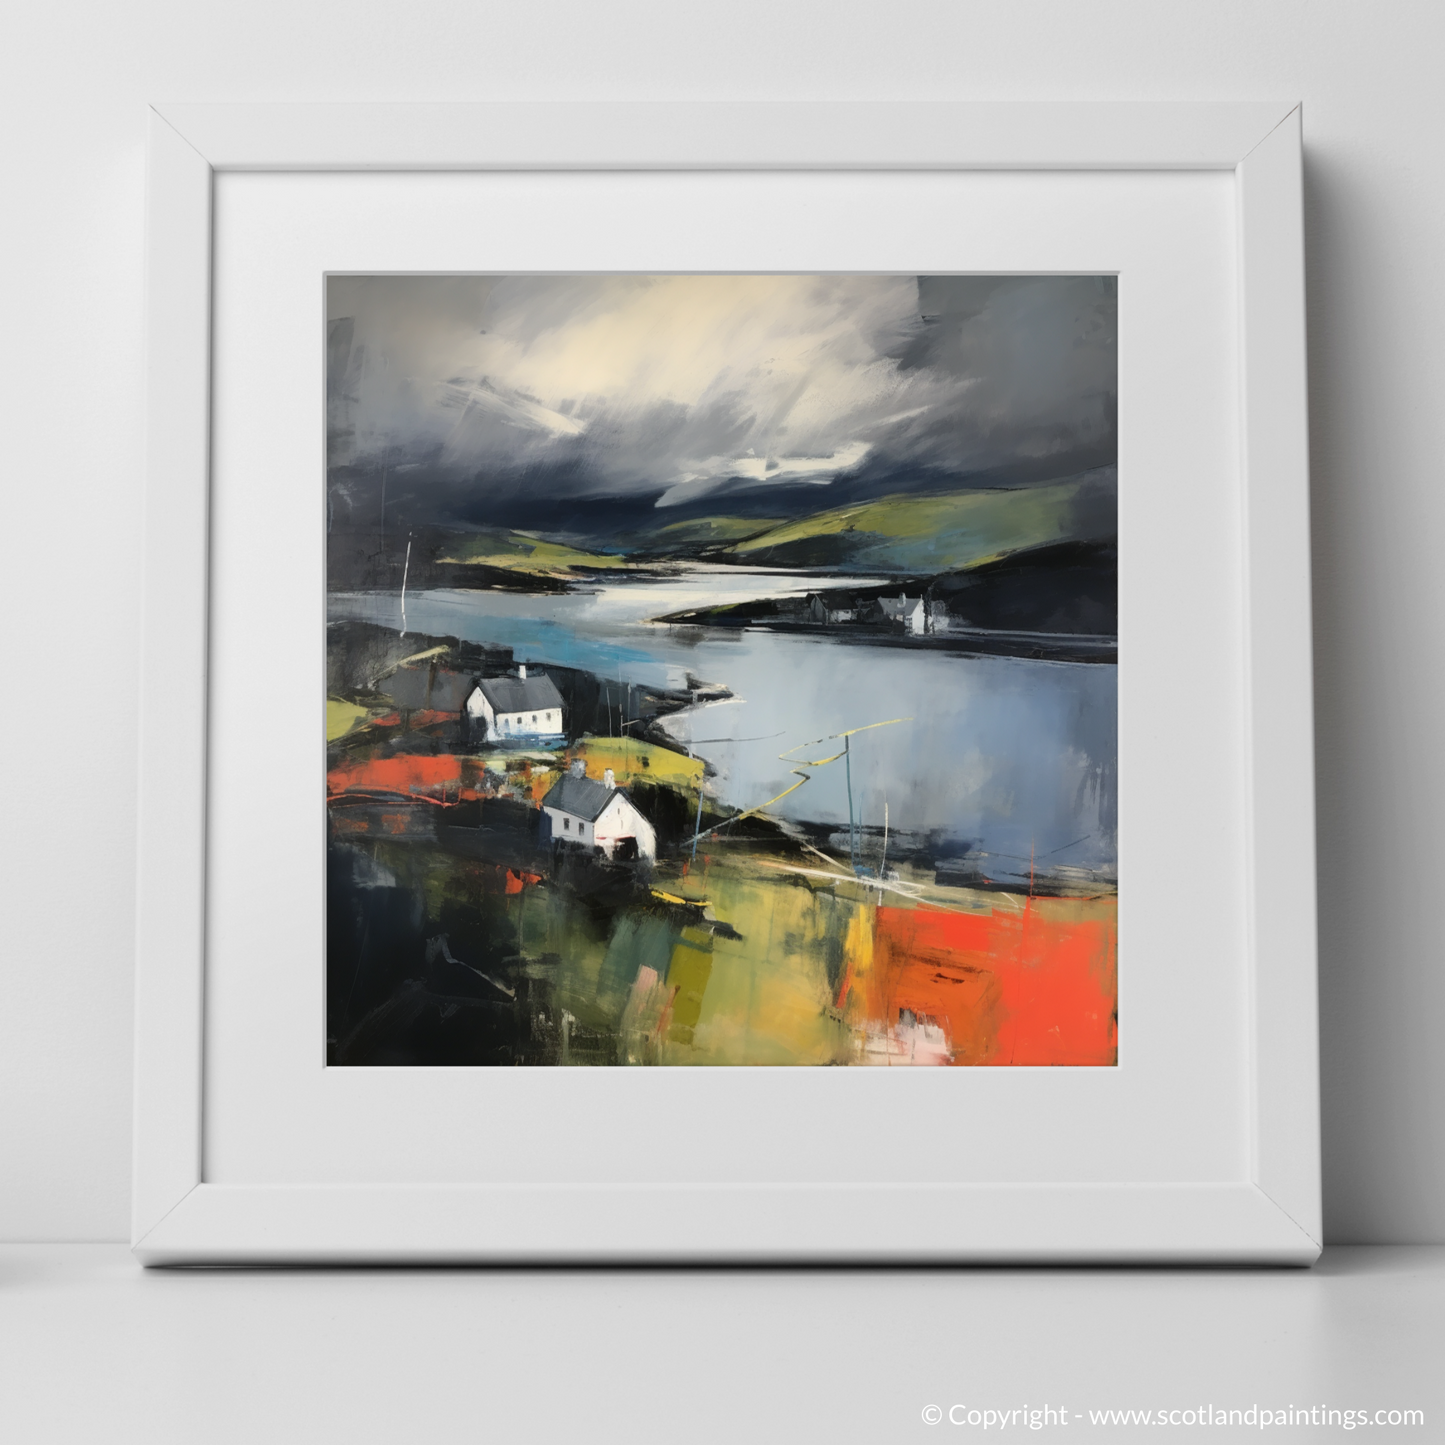 Tempest over Gairloch Harbour: An Abstract Impressionist Escape